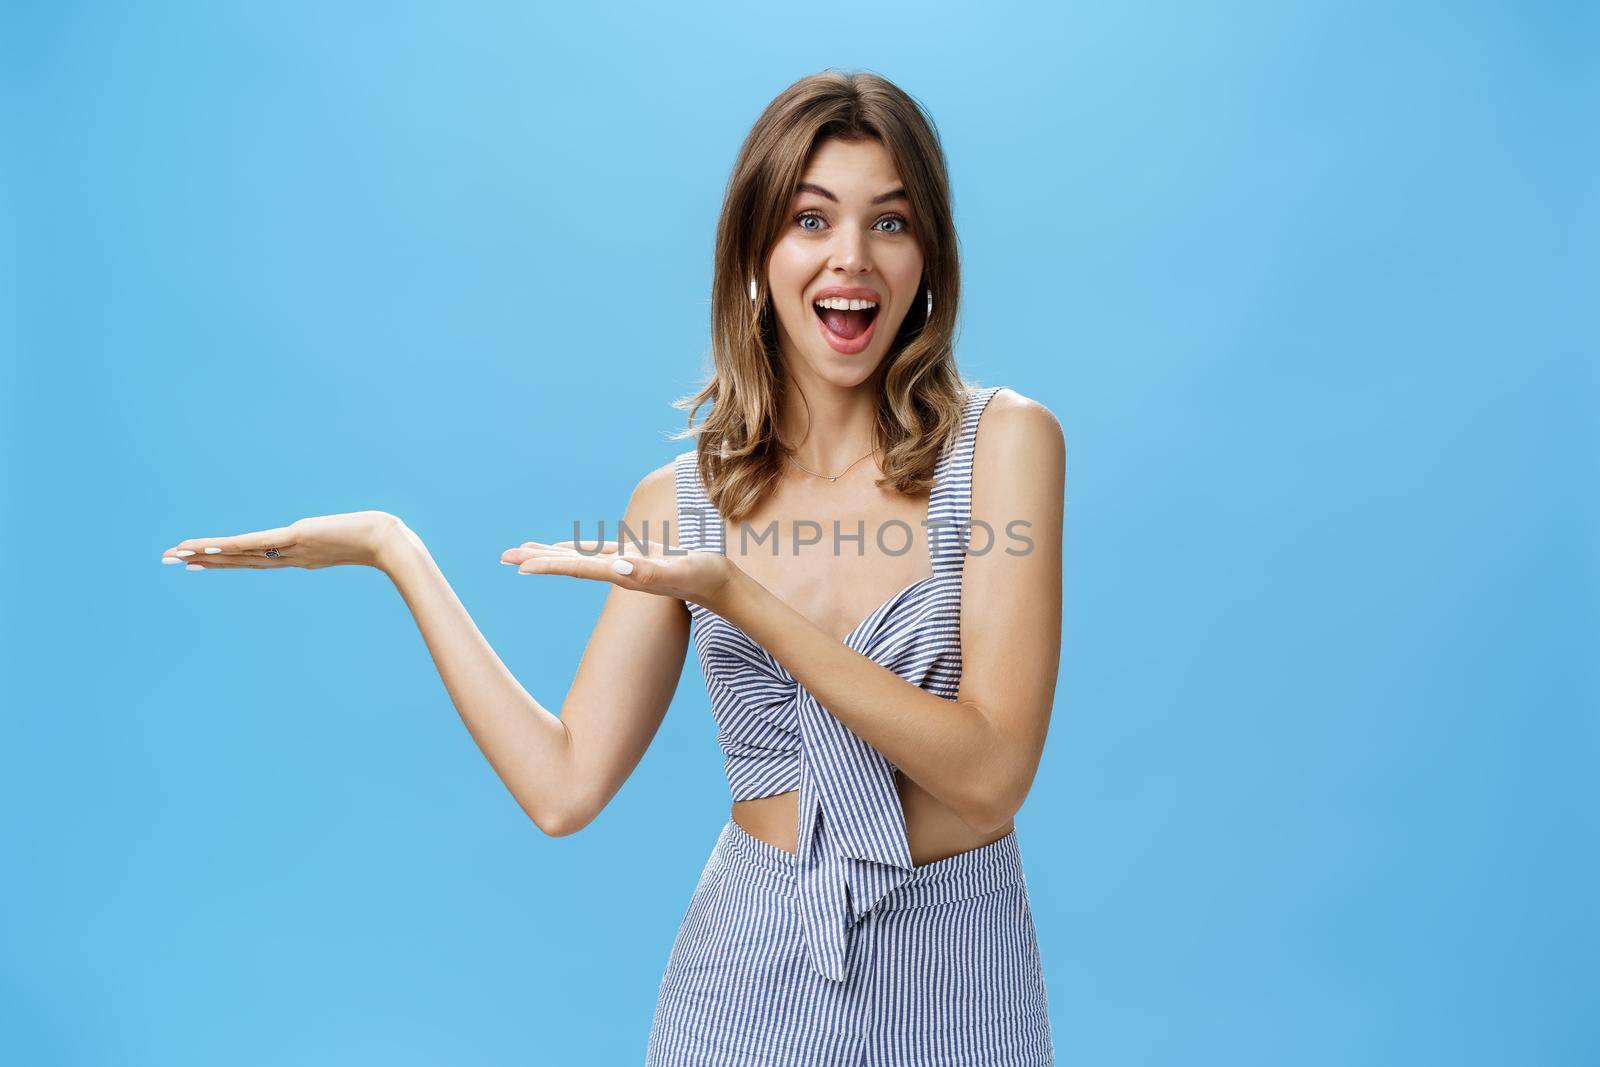 Woman presenting product over copy space. Good-looking charismatic adult tall woman with chestnut hair pointing at left side of wall and smiling broadly as if advertising against blue background.